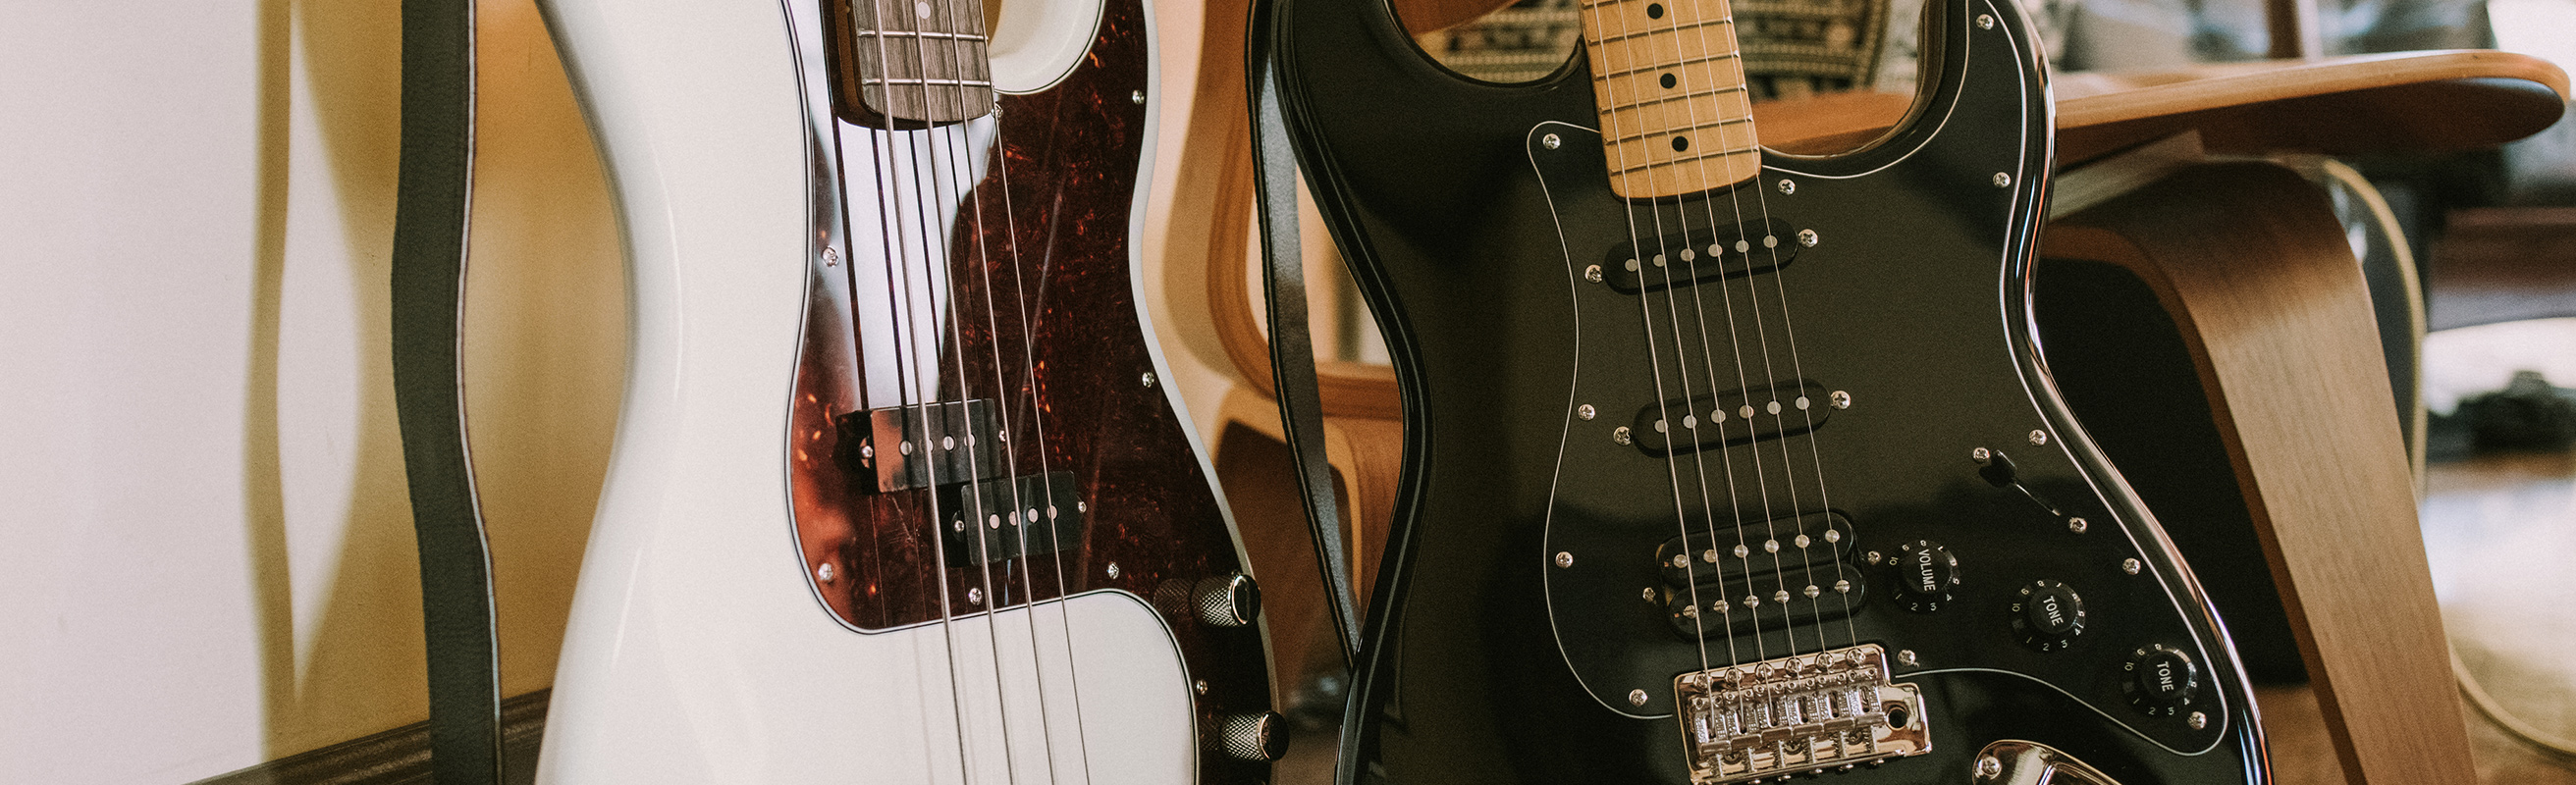 Bass vs Guitar: Differences & Which Is Better For You?